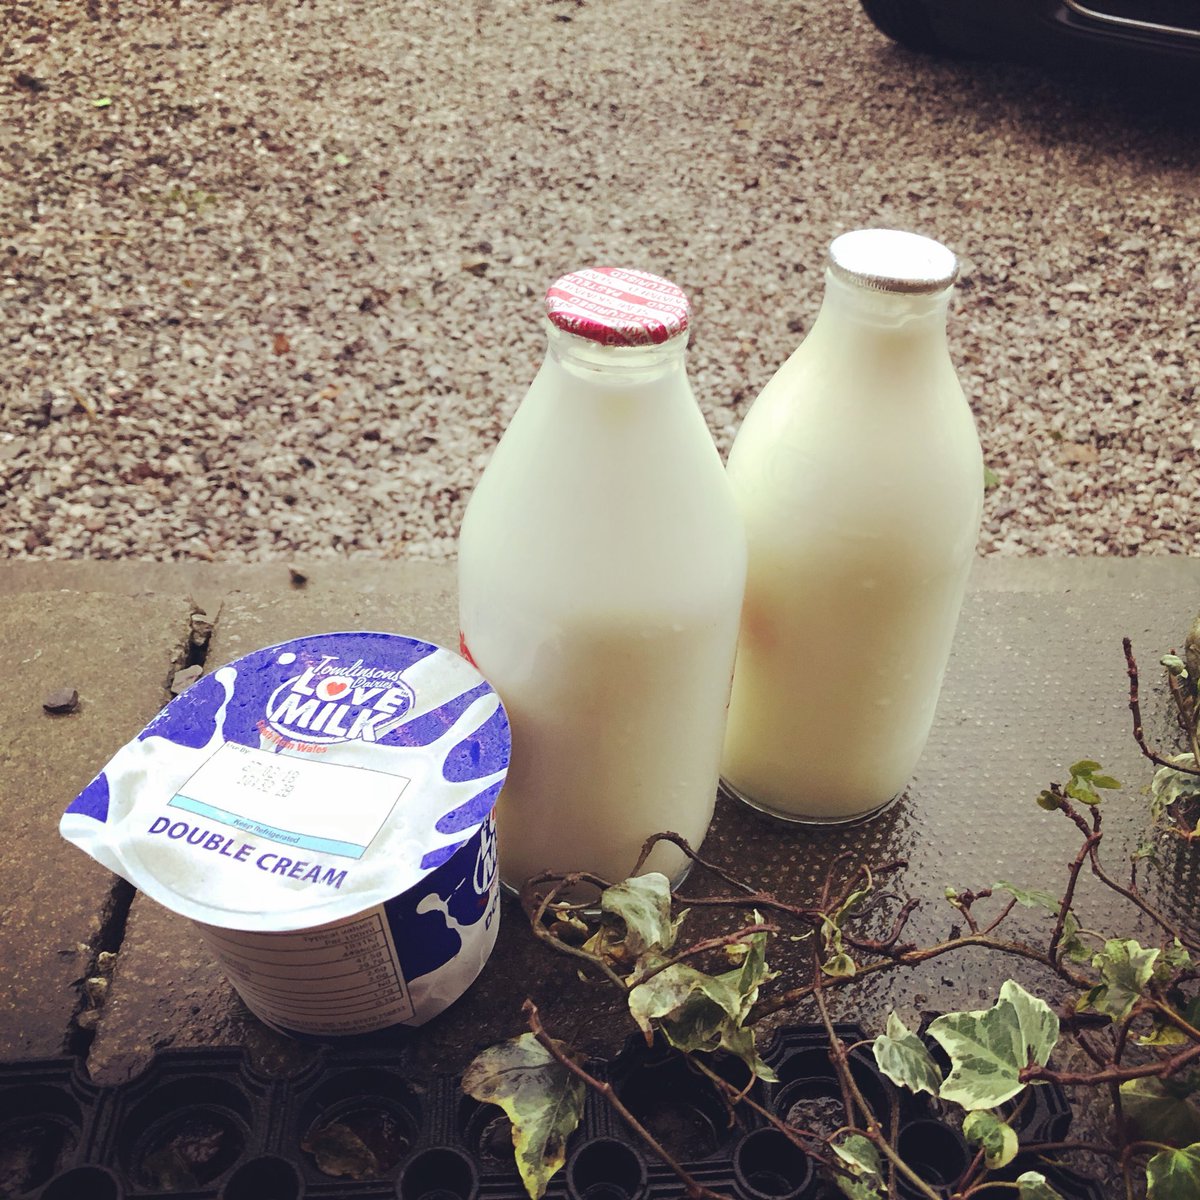 It felt like Christmas this morning....doorstep deliveries now in Nercwys. Local full fat milk on my cereal with cream. Oh yes!!!! Thank you Richie Hayes. #welshmilk #tomlinsonsdairies #doorstepdelivery #milkrevolution #supportlocal #simplethings #reusablebottles